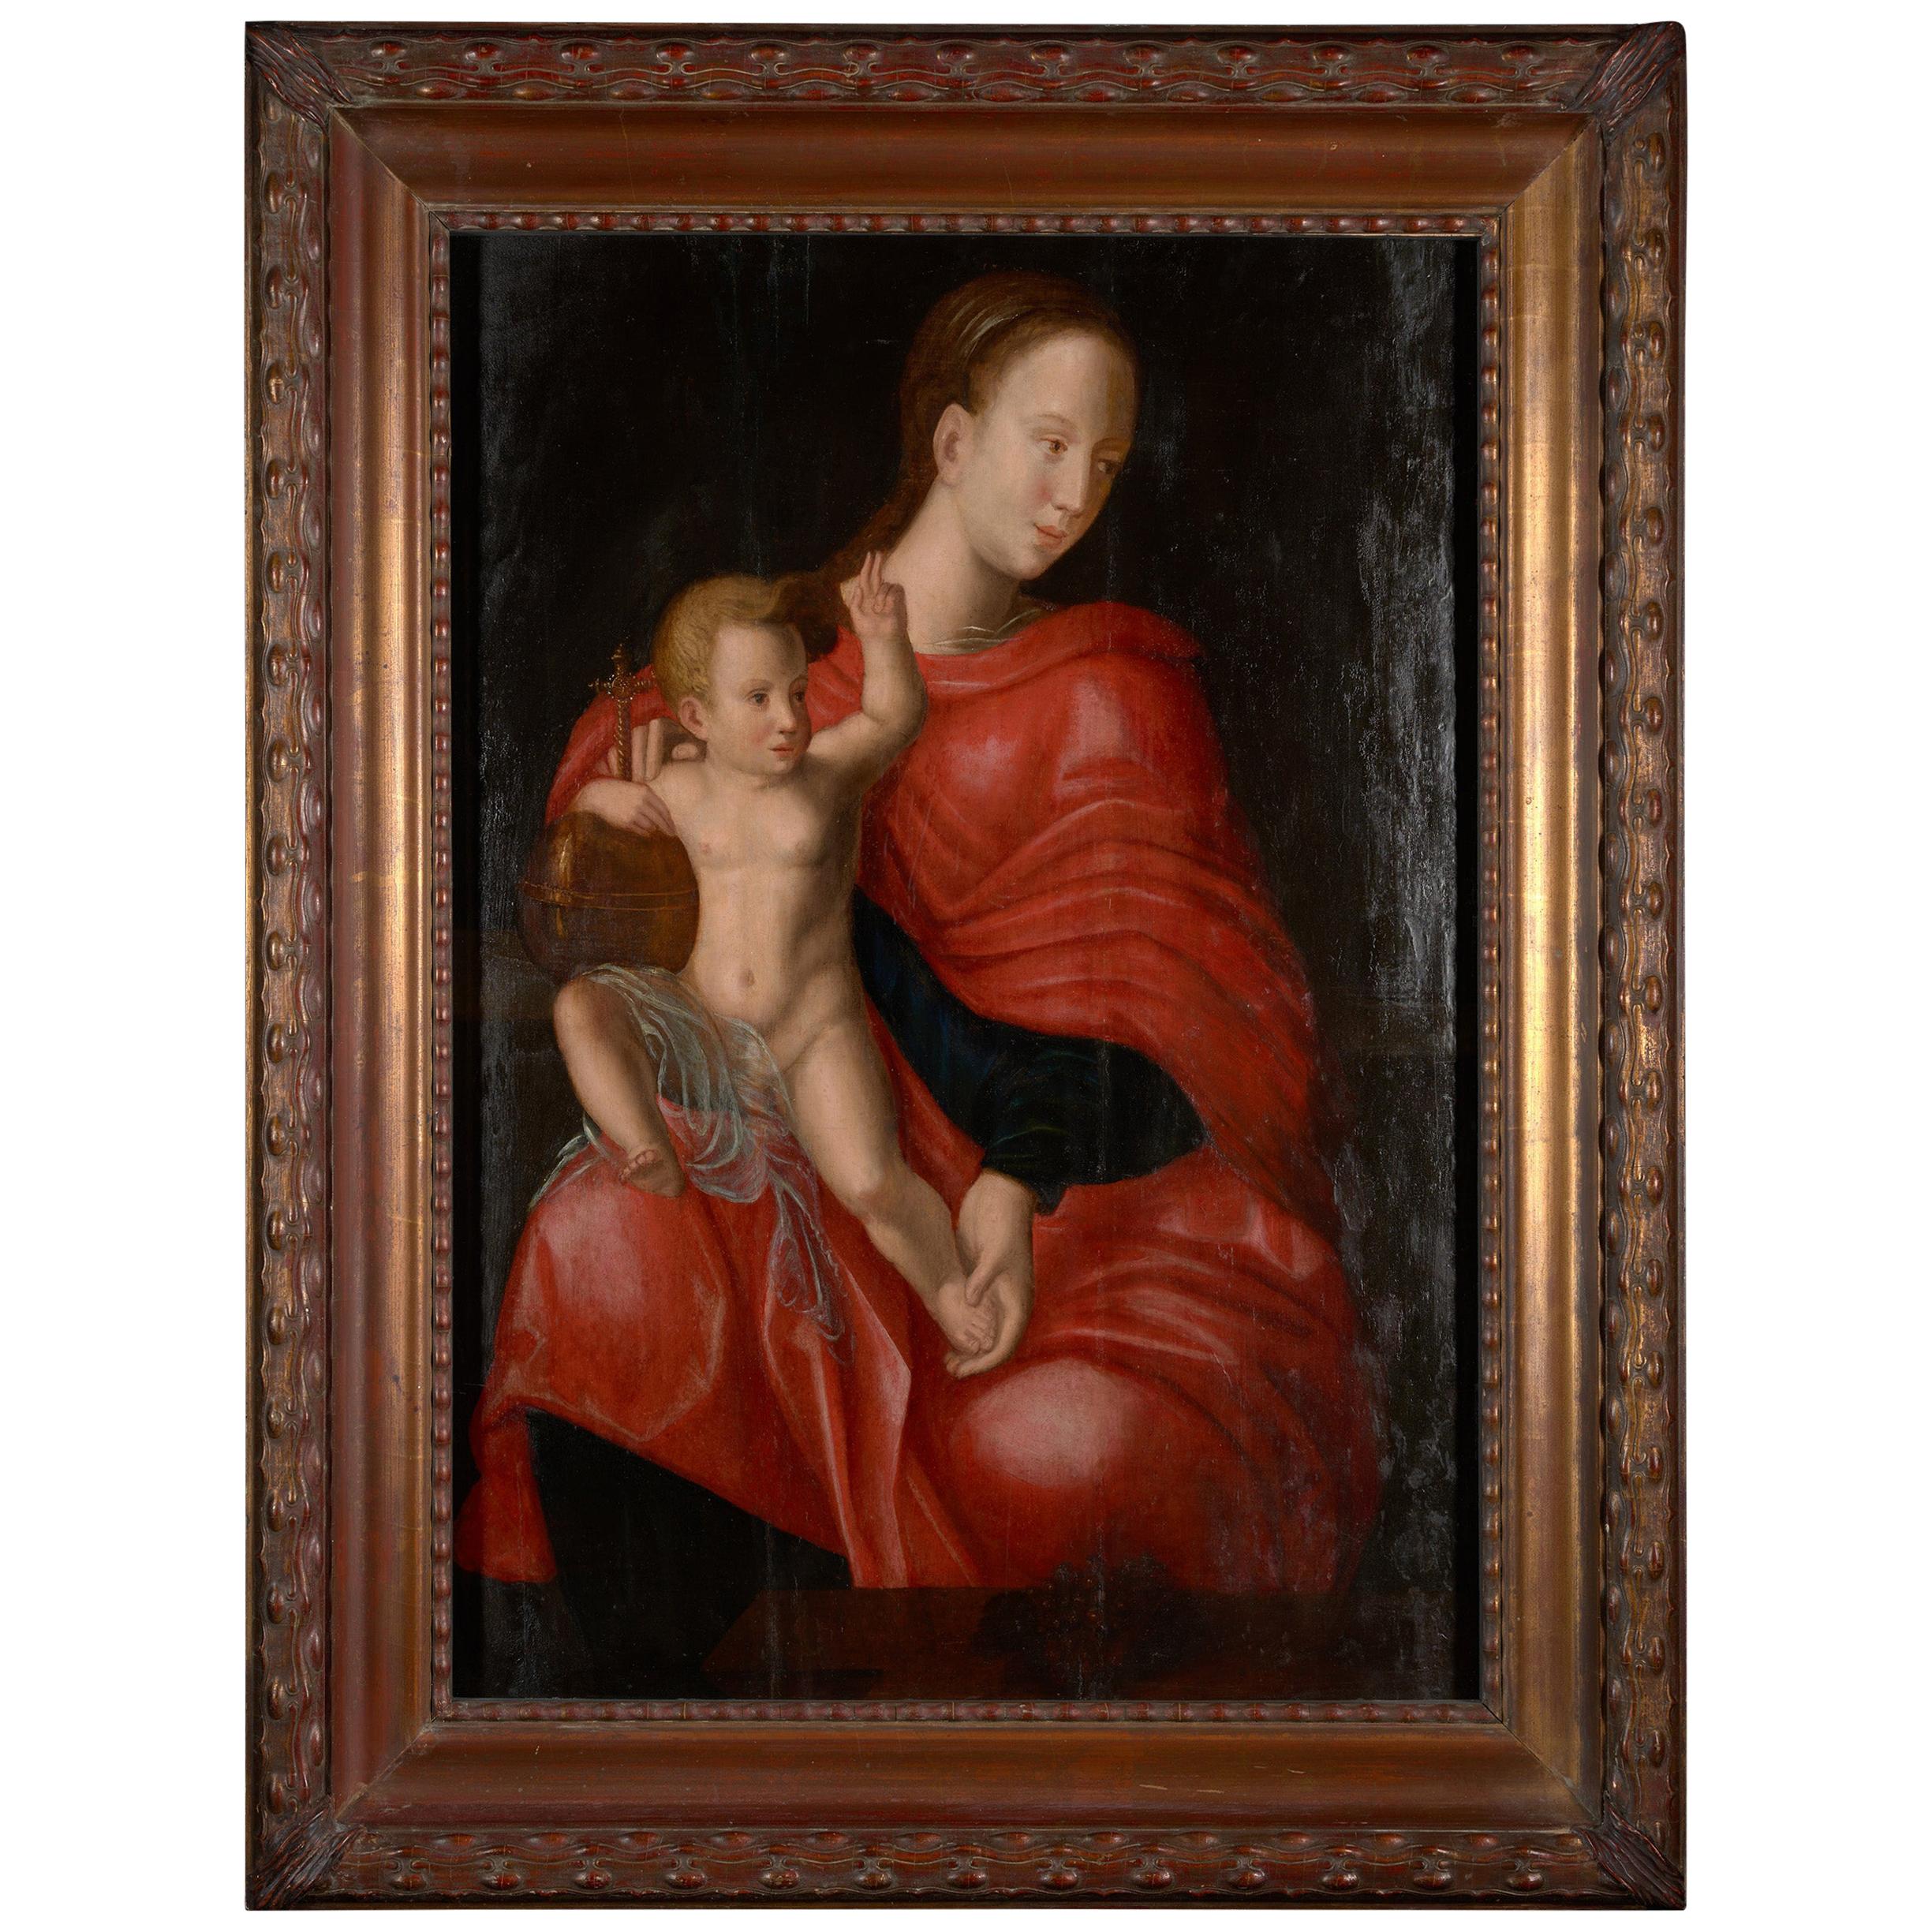 Flemish School, Painting of Madonna and Child, Oil on Panel, Framed